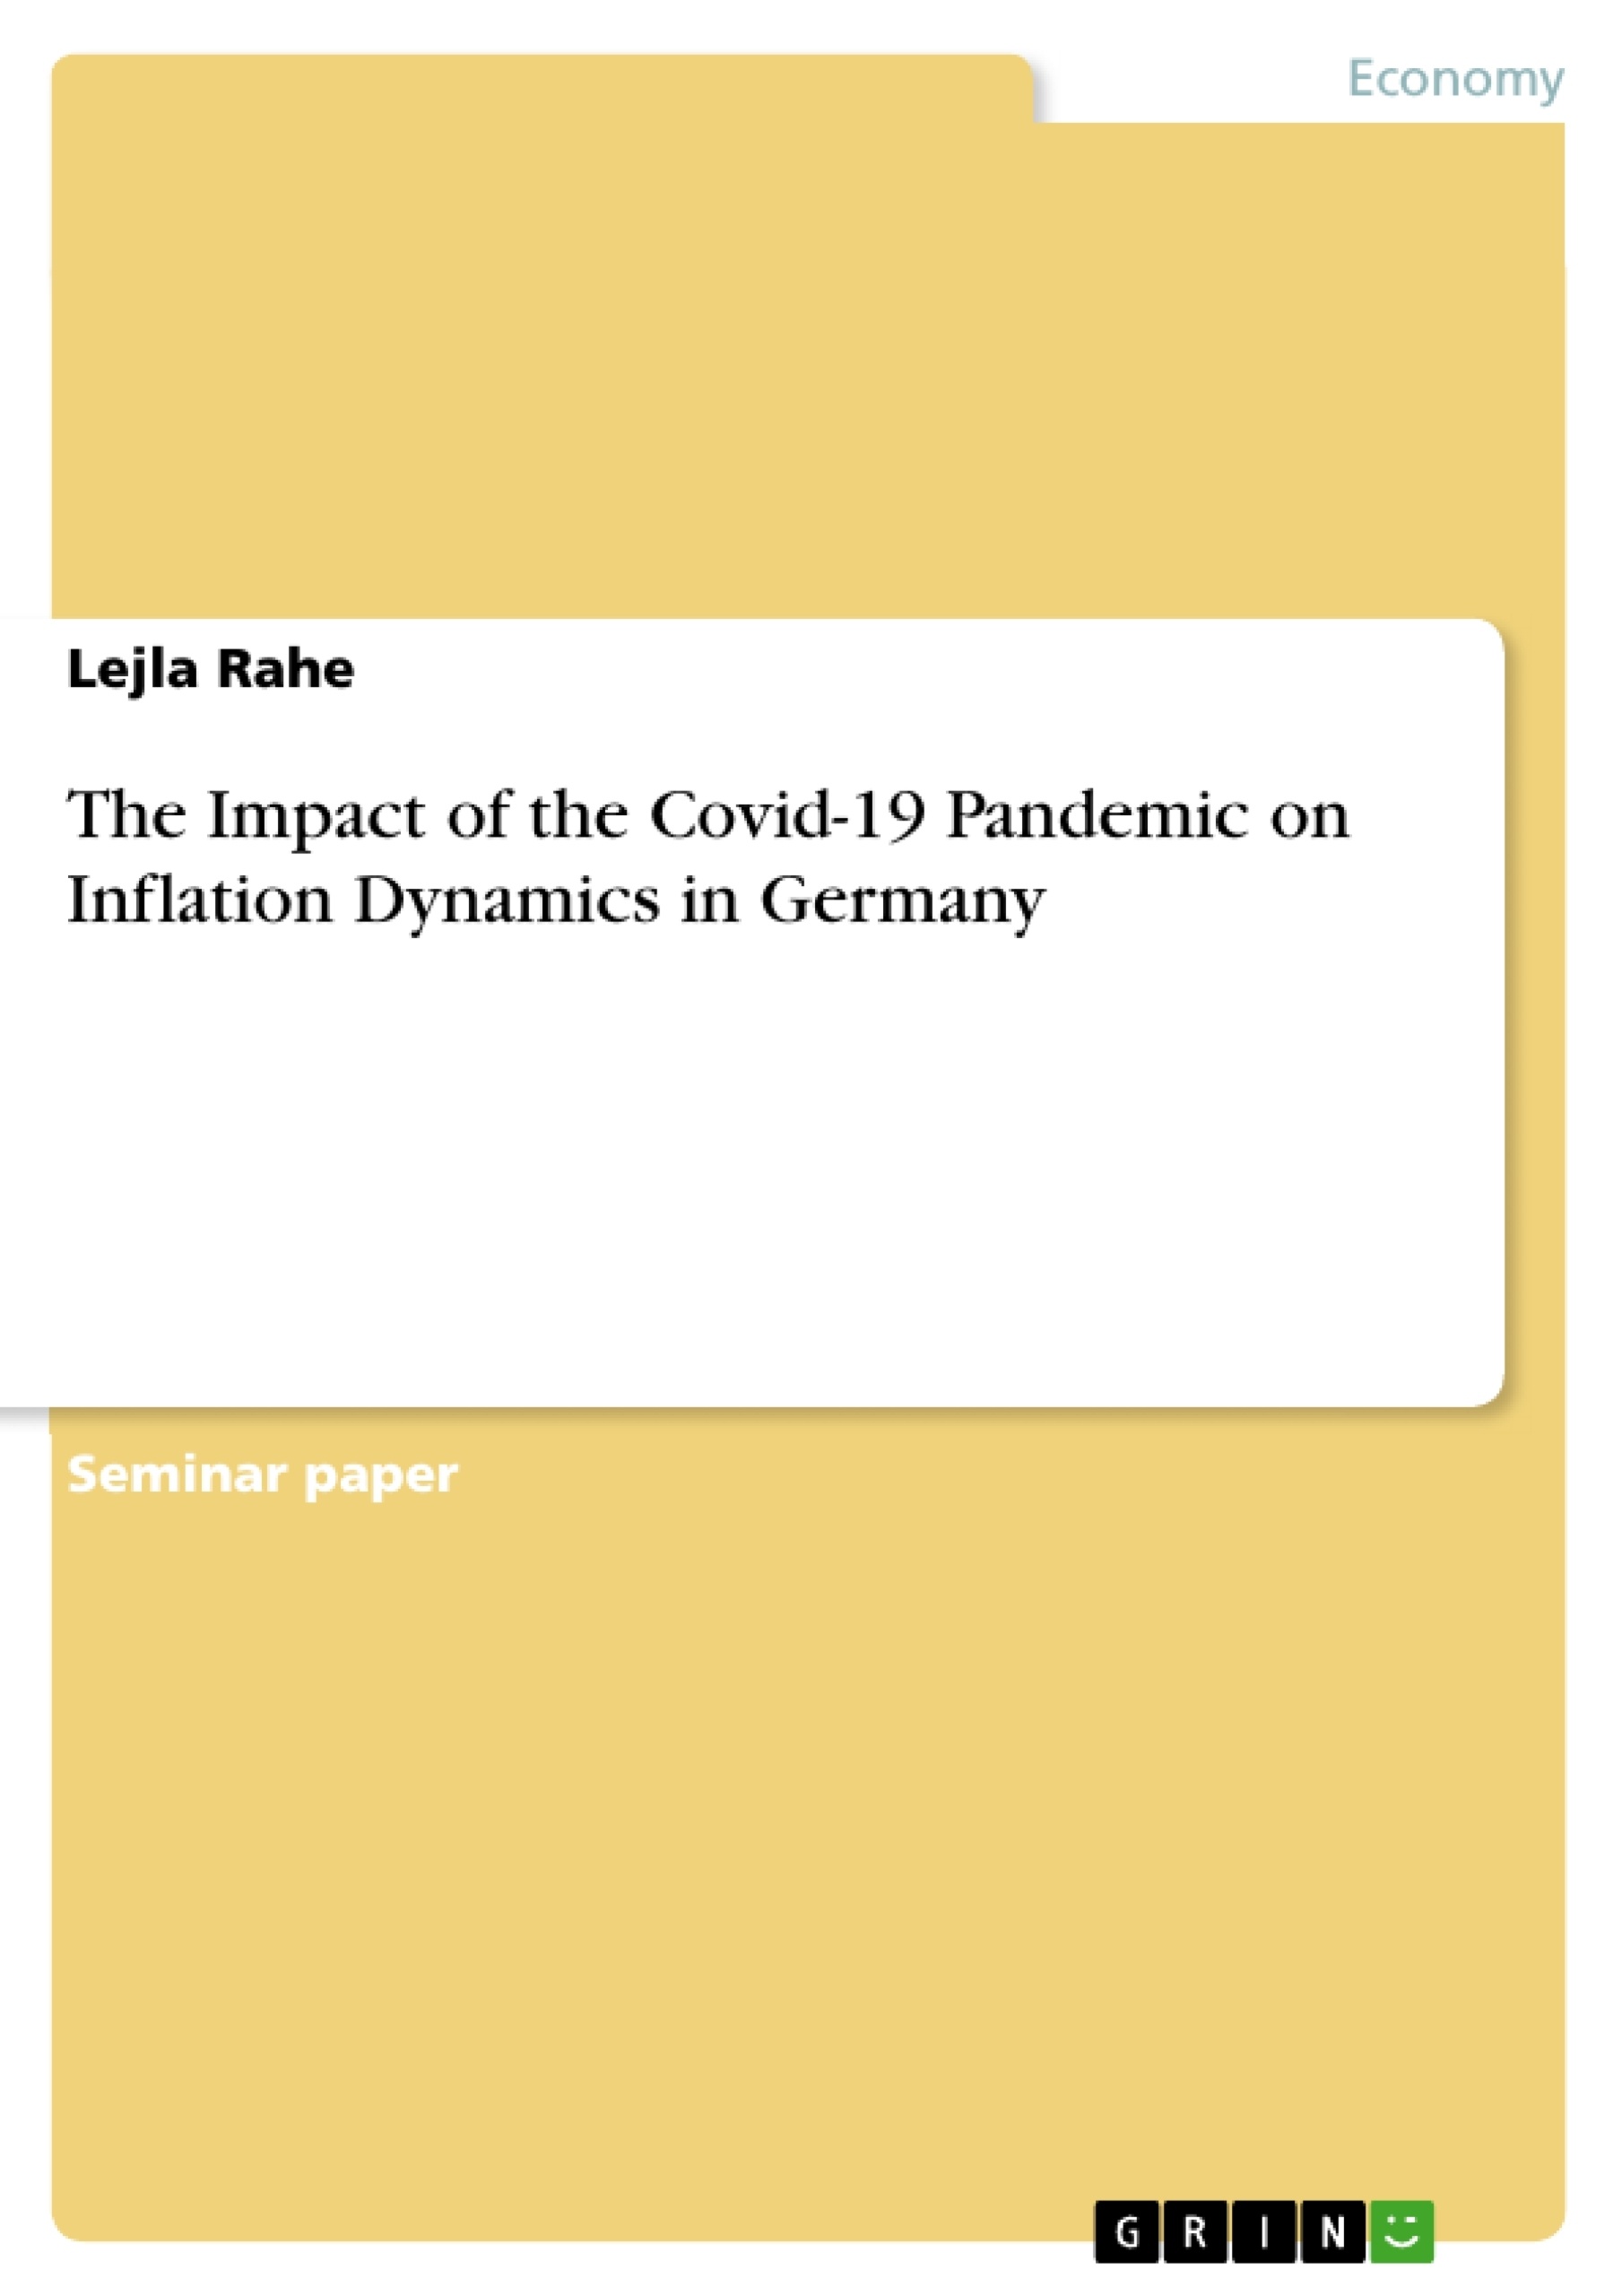 Title: The Impact of the Covid-19 Pandemic on Inflation Dynamics in Germany